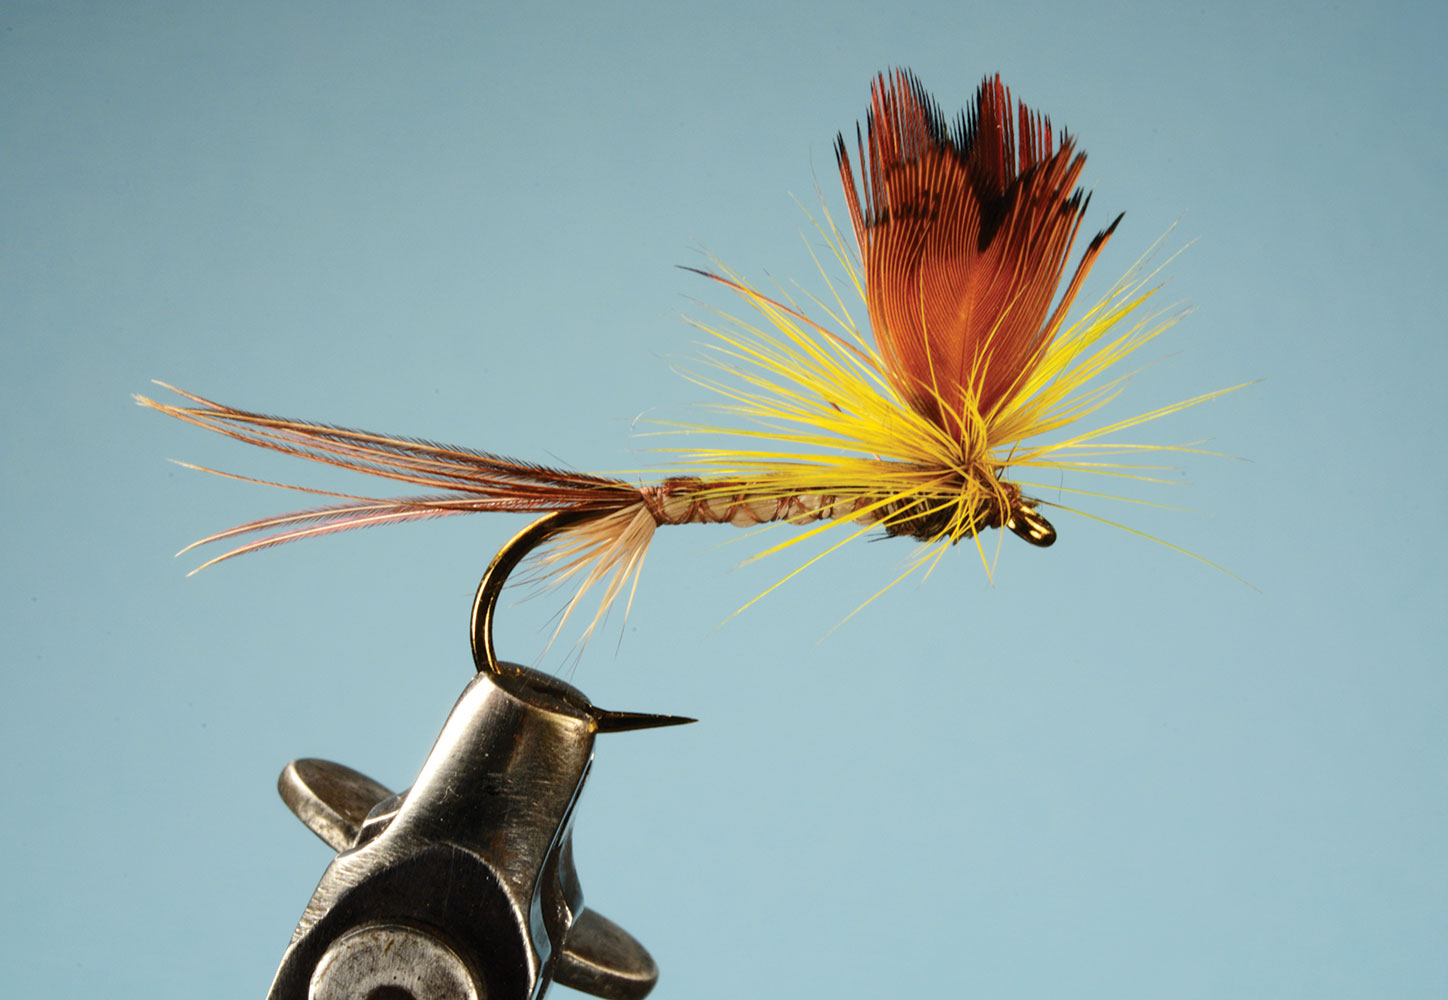 Fly Tying With Gamebird Feathers